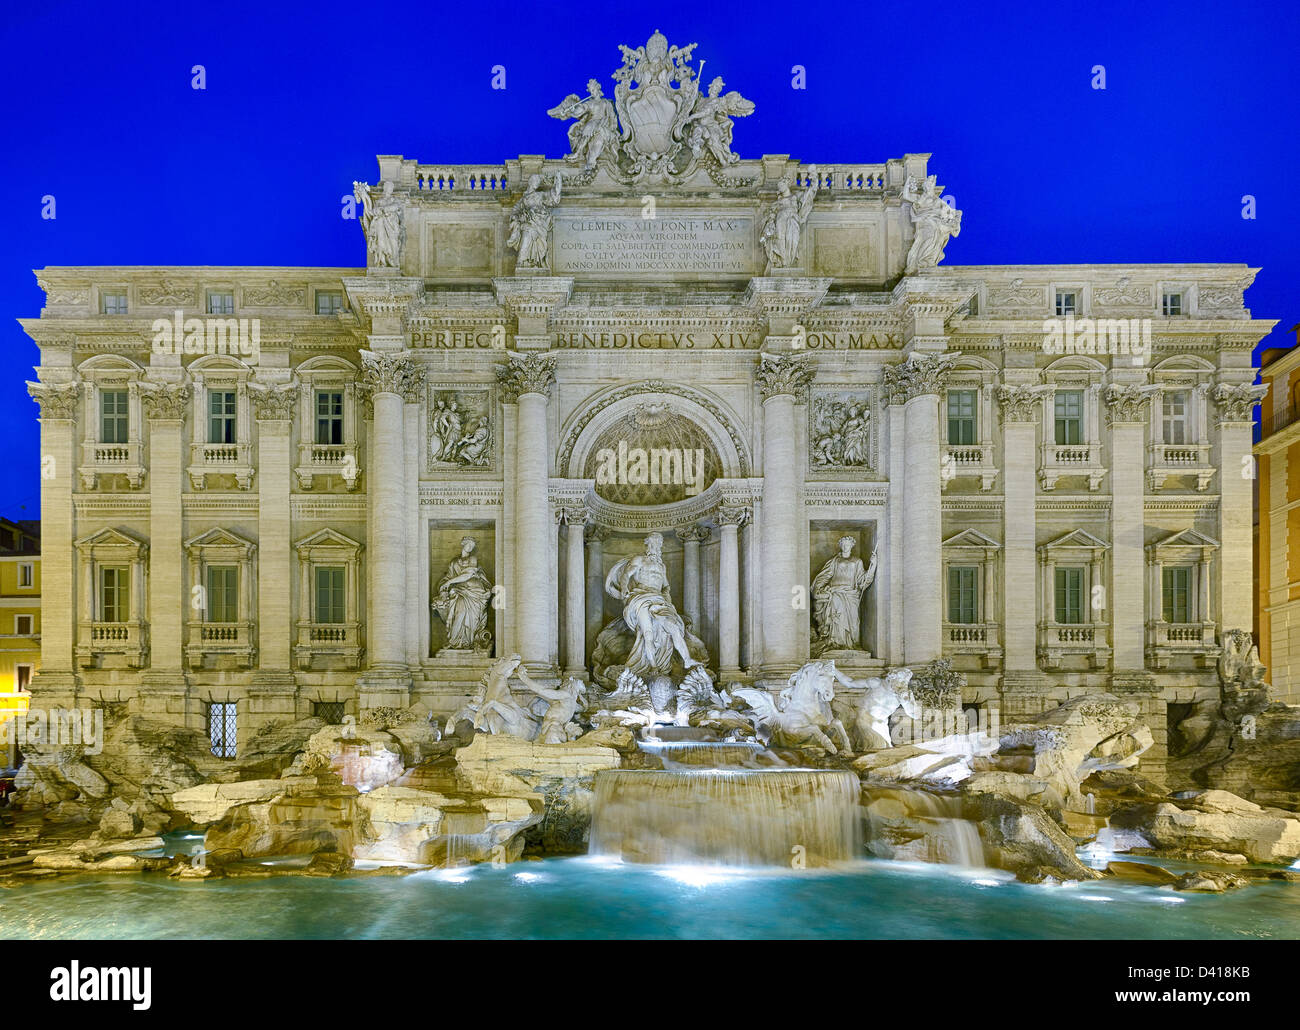 Night time floodlit details of statues in Trevi fountain in Rome Italy Stock Photo